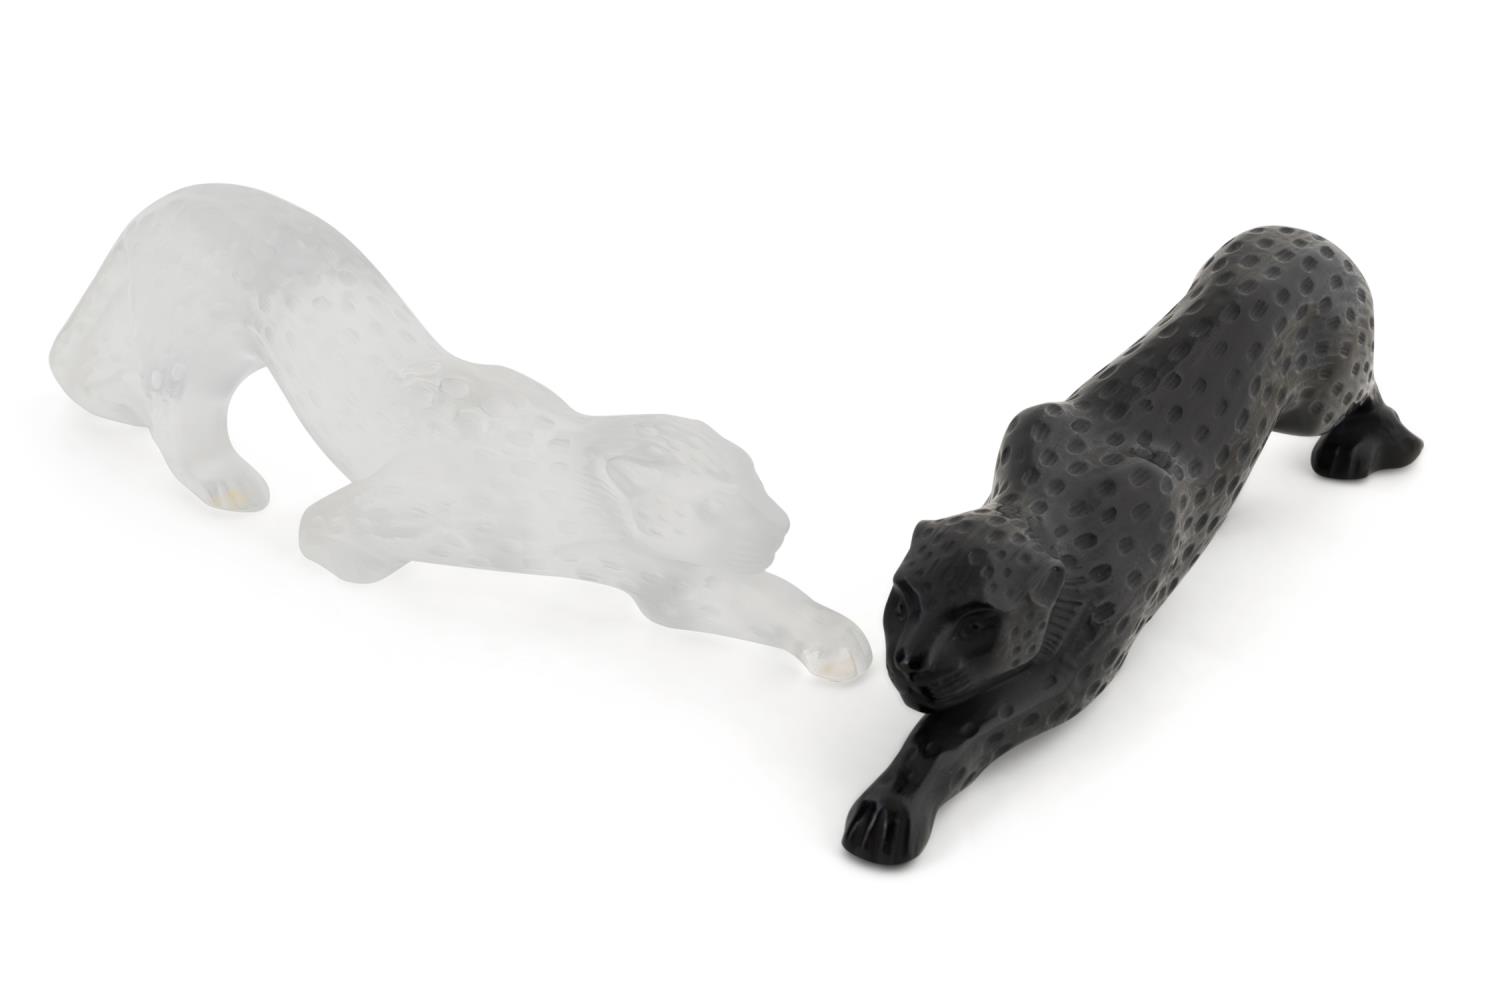 TWO LALIQUE ZEILA PANTHER SCULPTURES 2bfee3